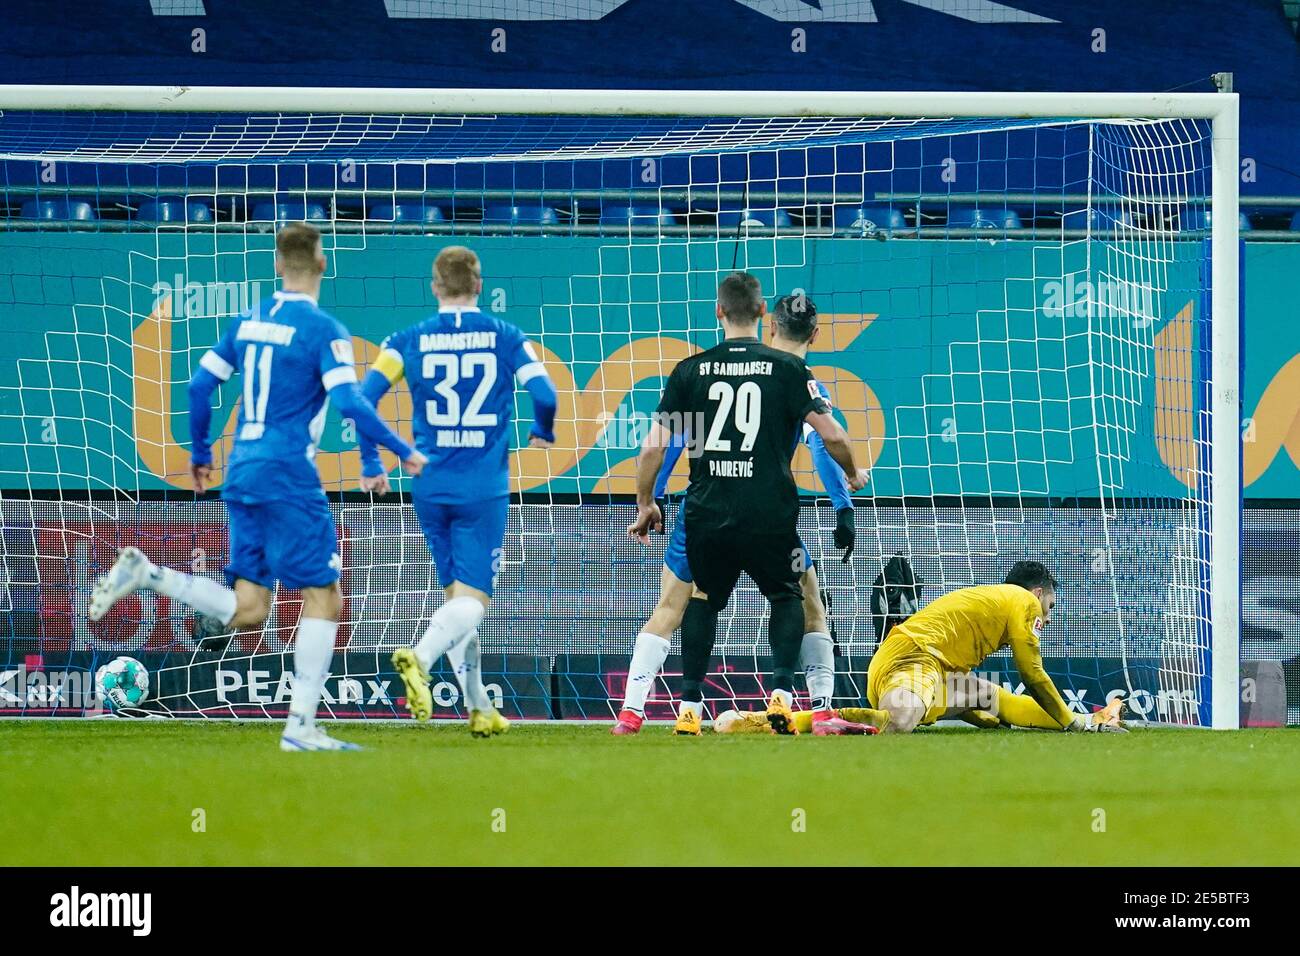 Darmstadt, Germany. 27th Jan, 2021. Football: 2. Bundesliga, SV Darmstadt 98 - SV Sandhausen, Matchday 18, Merck-Stadion am Böllenfalltor. Sandhausen goalkeeper Stefanos Kapino is unable to keep out Darmstadt's Marvin Mehlem's (not in picture) shot on goal to make it 2:1. Credit: Uwe Anspach/dpa - IMPORTANT NOTE: In accordance with the regulations of the DFL Deutsche Fußball Liga and/or the DFB Deutscher Fußball-Bund, it is prohibited to use or have used photographs taken in the stadium and/or of the match in the form of sequence pictures and/or video-like photo series./dpa/Alamy Live News Stock Photo